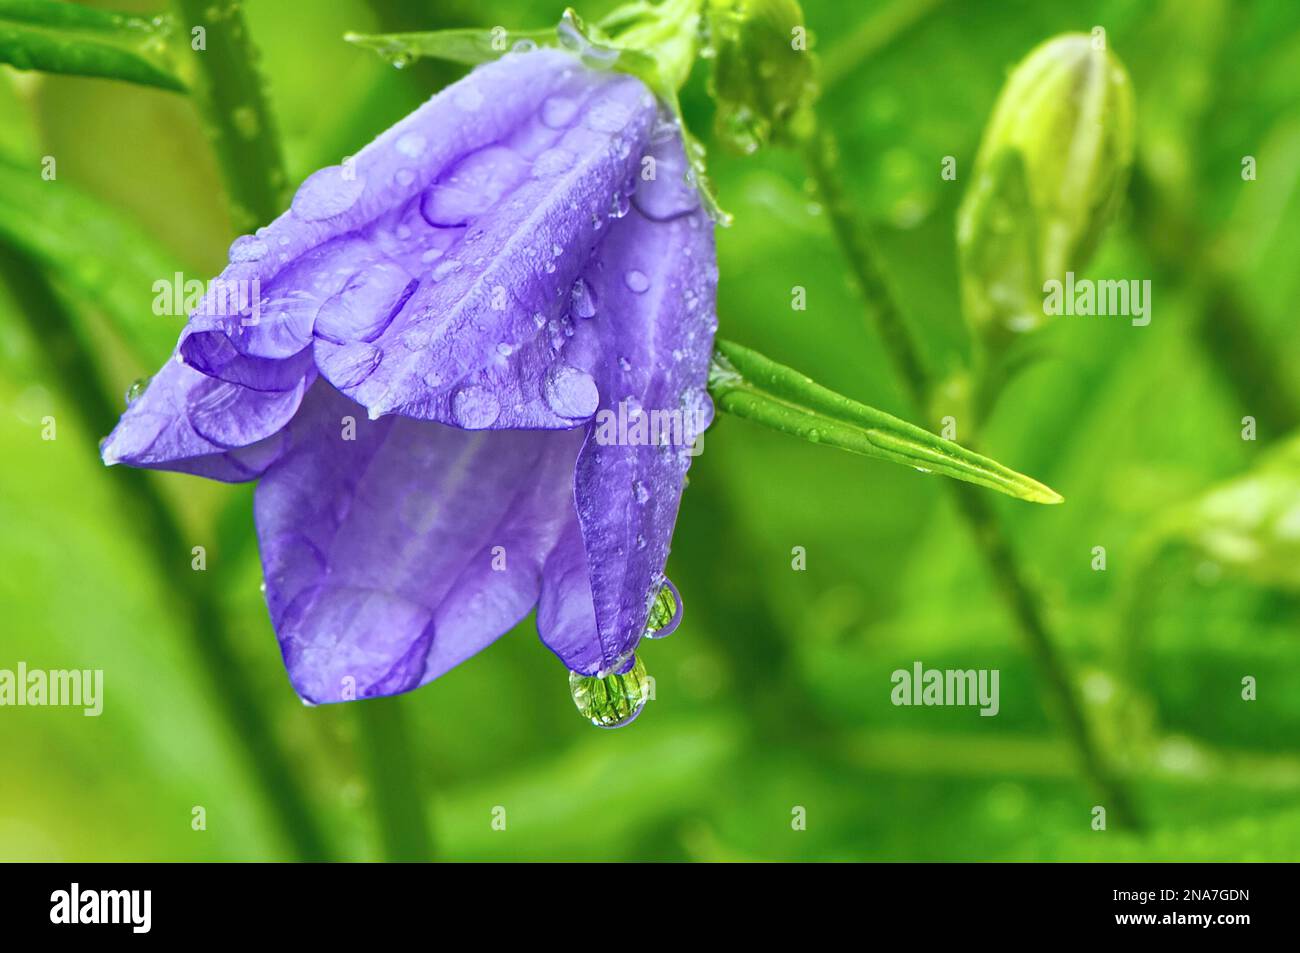 A Peach-leaved Bellflower (Campanula persicifolia) -closeup of a single purple blossom - bud opening with raindrops and refraction. Stock Photo